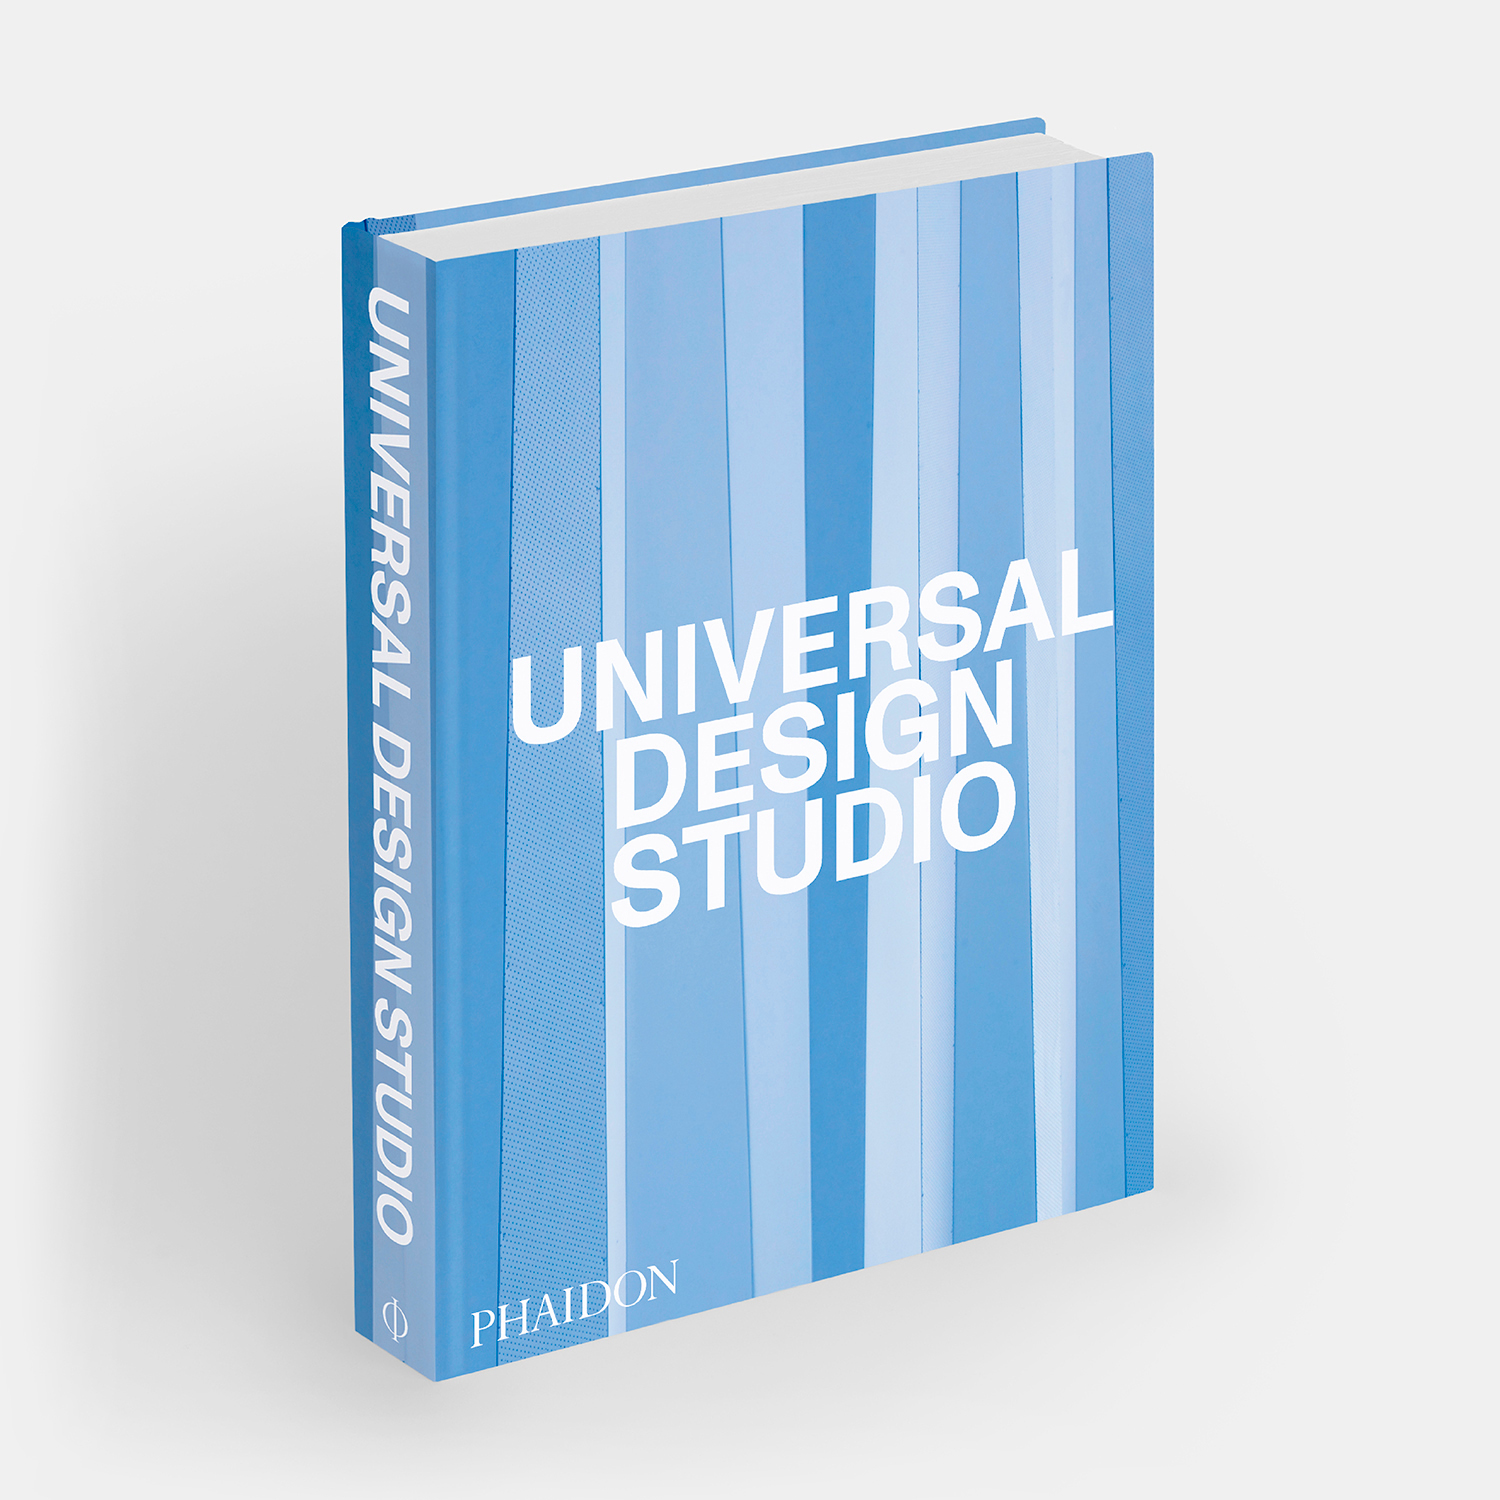 All you need to know about Universal Design Studio